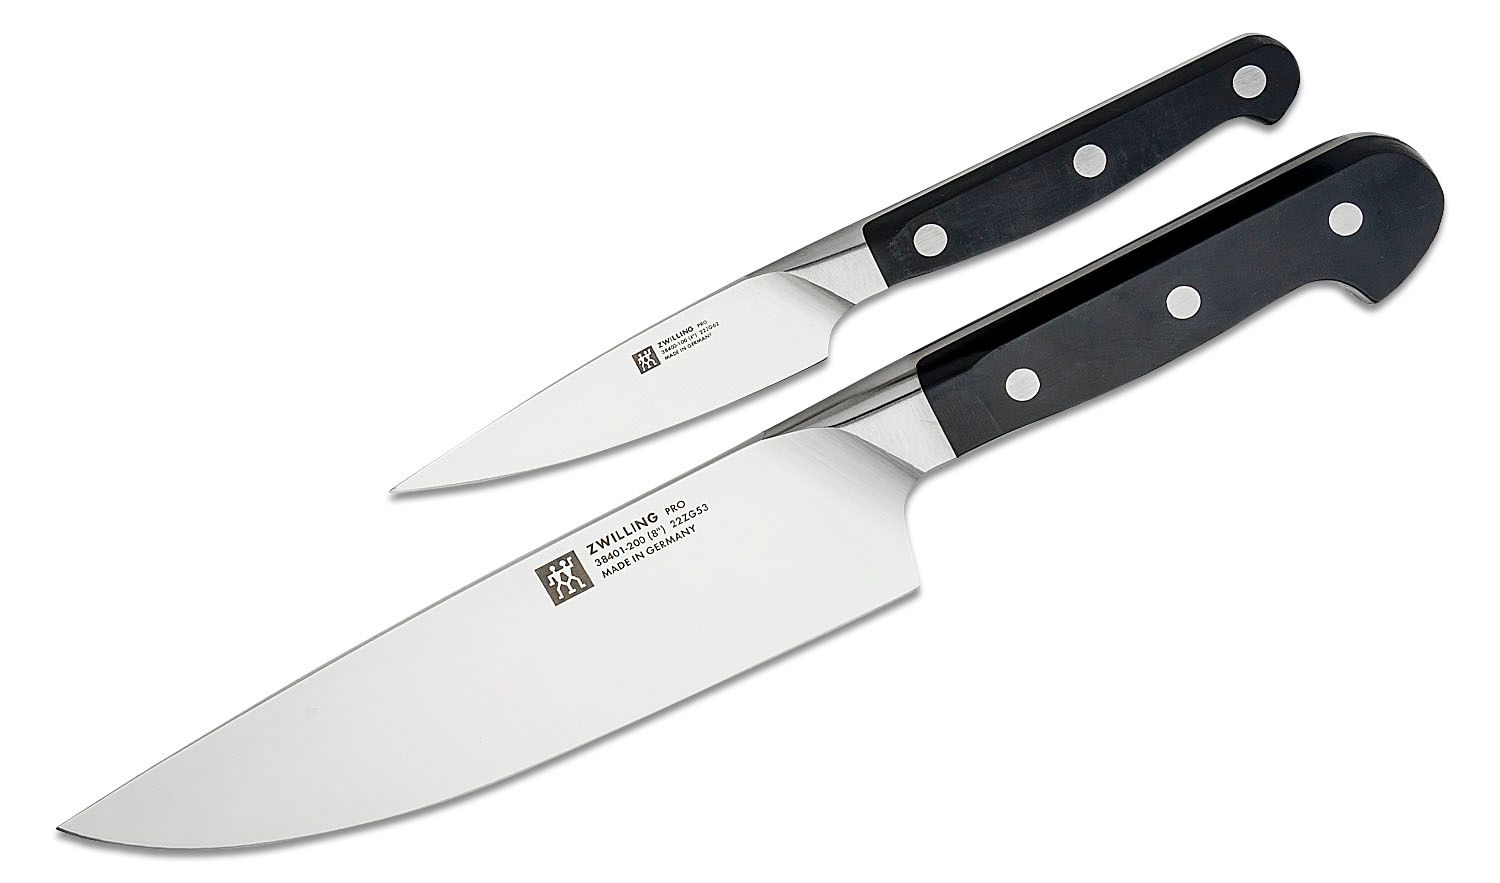 Zwilling Pro 8-inch, Traditional Chef's Knife